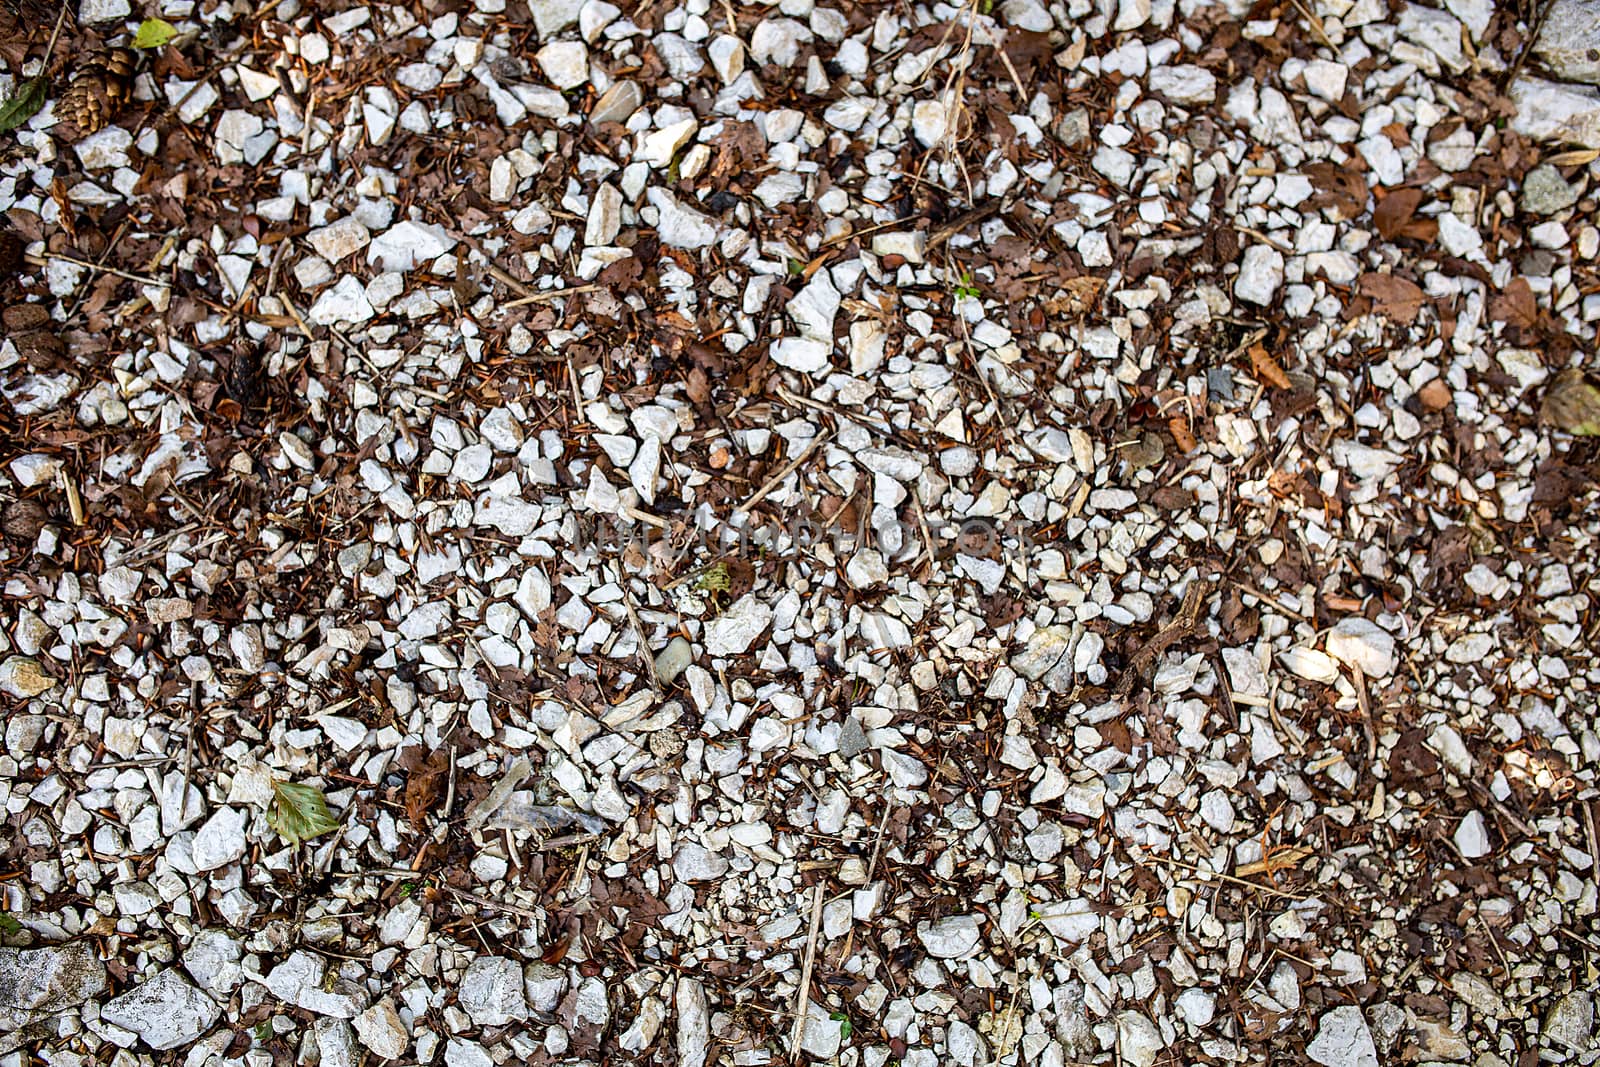 Background image of a stone crumb with small and large stones by 977_ReX_977